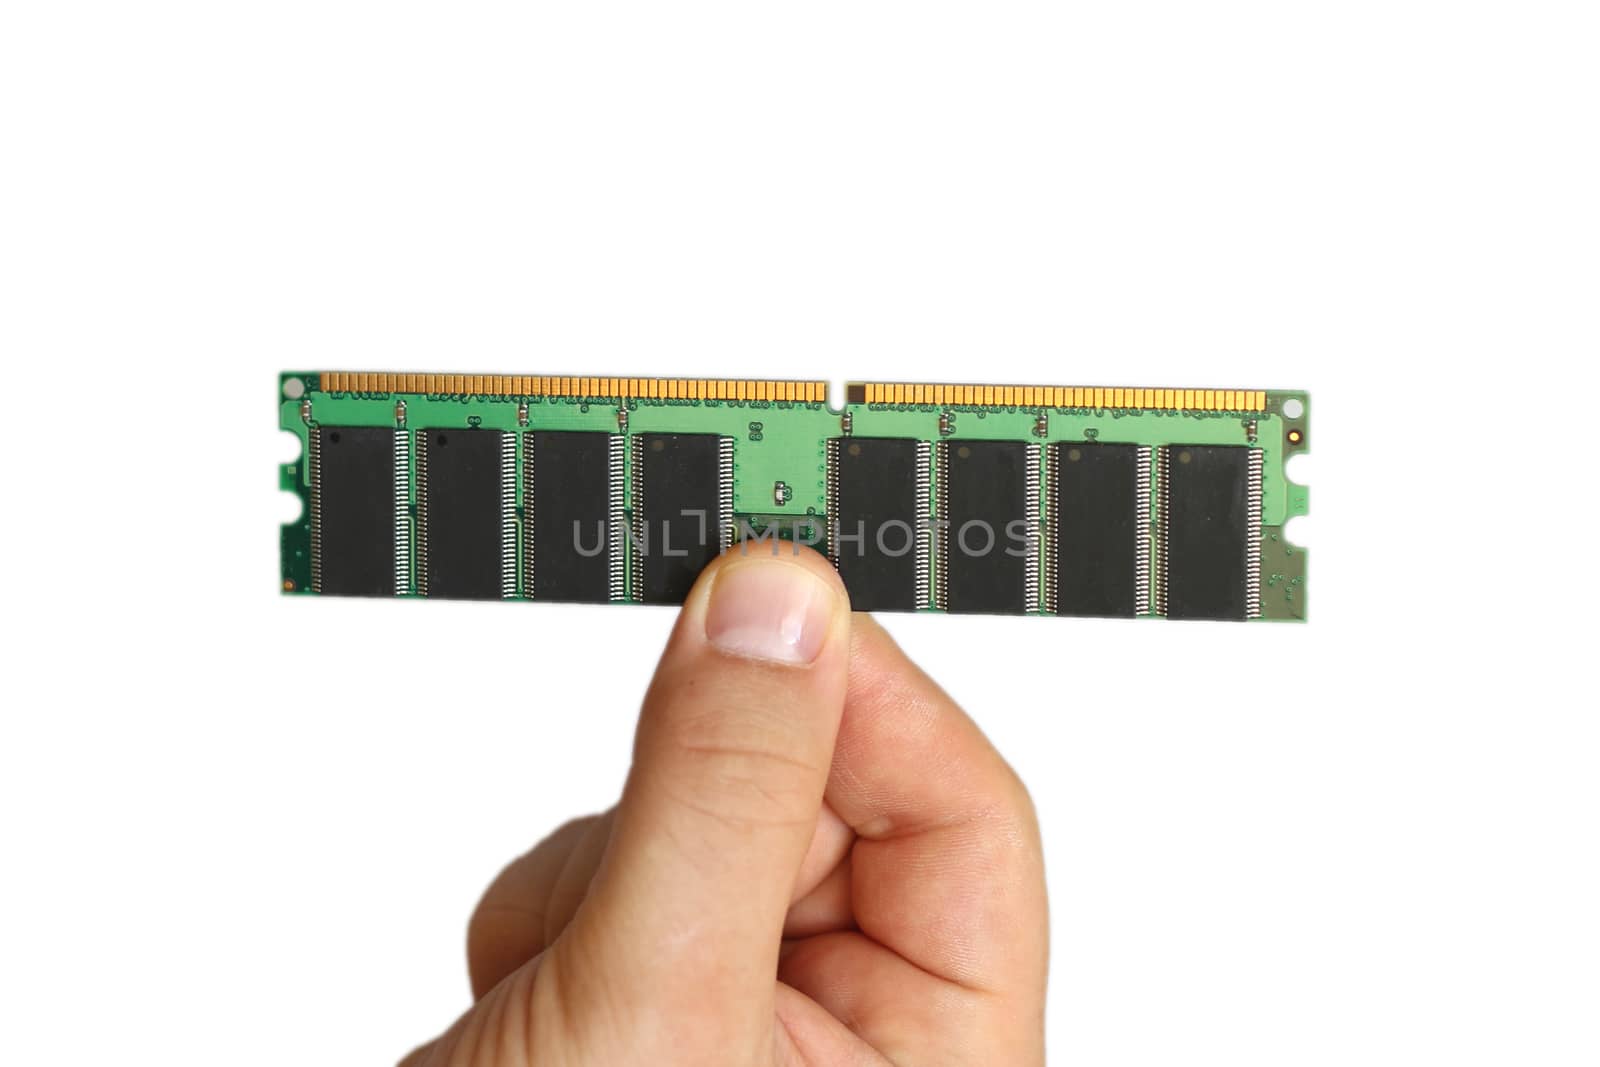 Man holding up a RAM module, or random access memory, in which all storage locations can be rapidly accessed in the same amount of time used by a computer operating system, on white